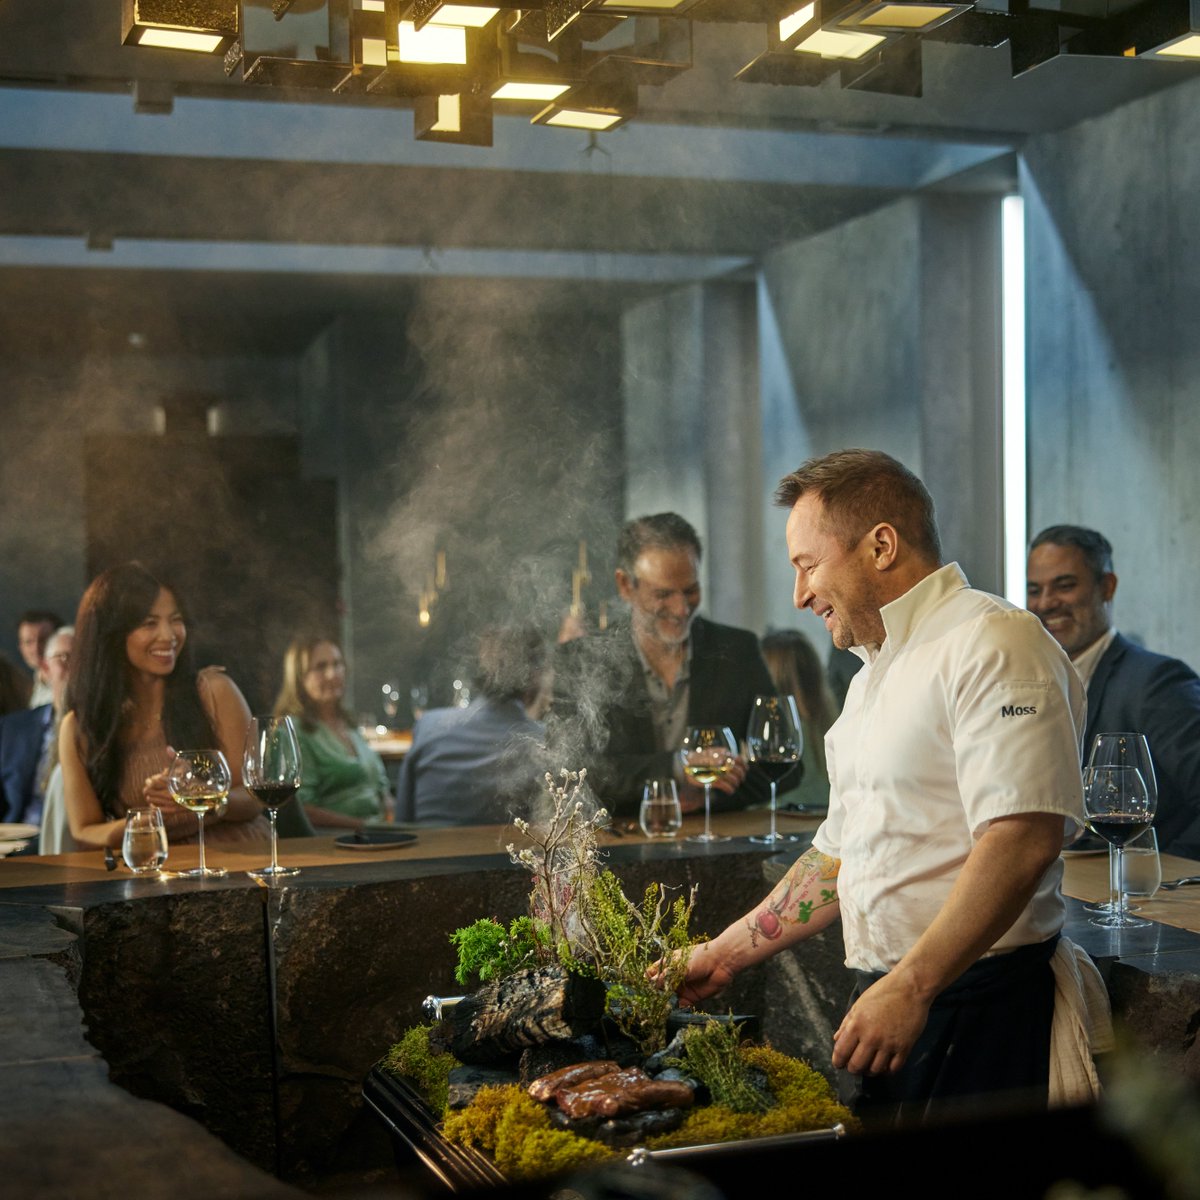 Coming this April! 🌟 @mossrestaurant Kitchen's Table is about to debut. Starting in the subterranean wine cellar and concluding in the restaurant with a gourmet celebration that blends timeless traditions with innovative flavors. #MossRestaurant #BlueLagoonIceland